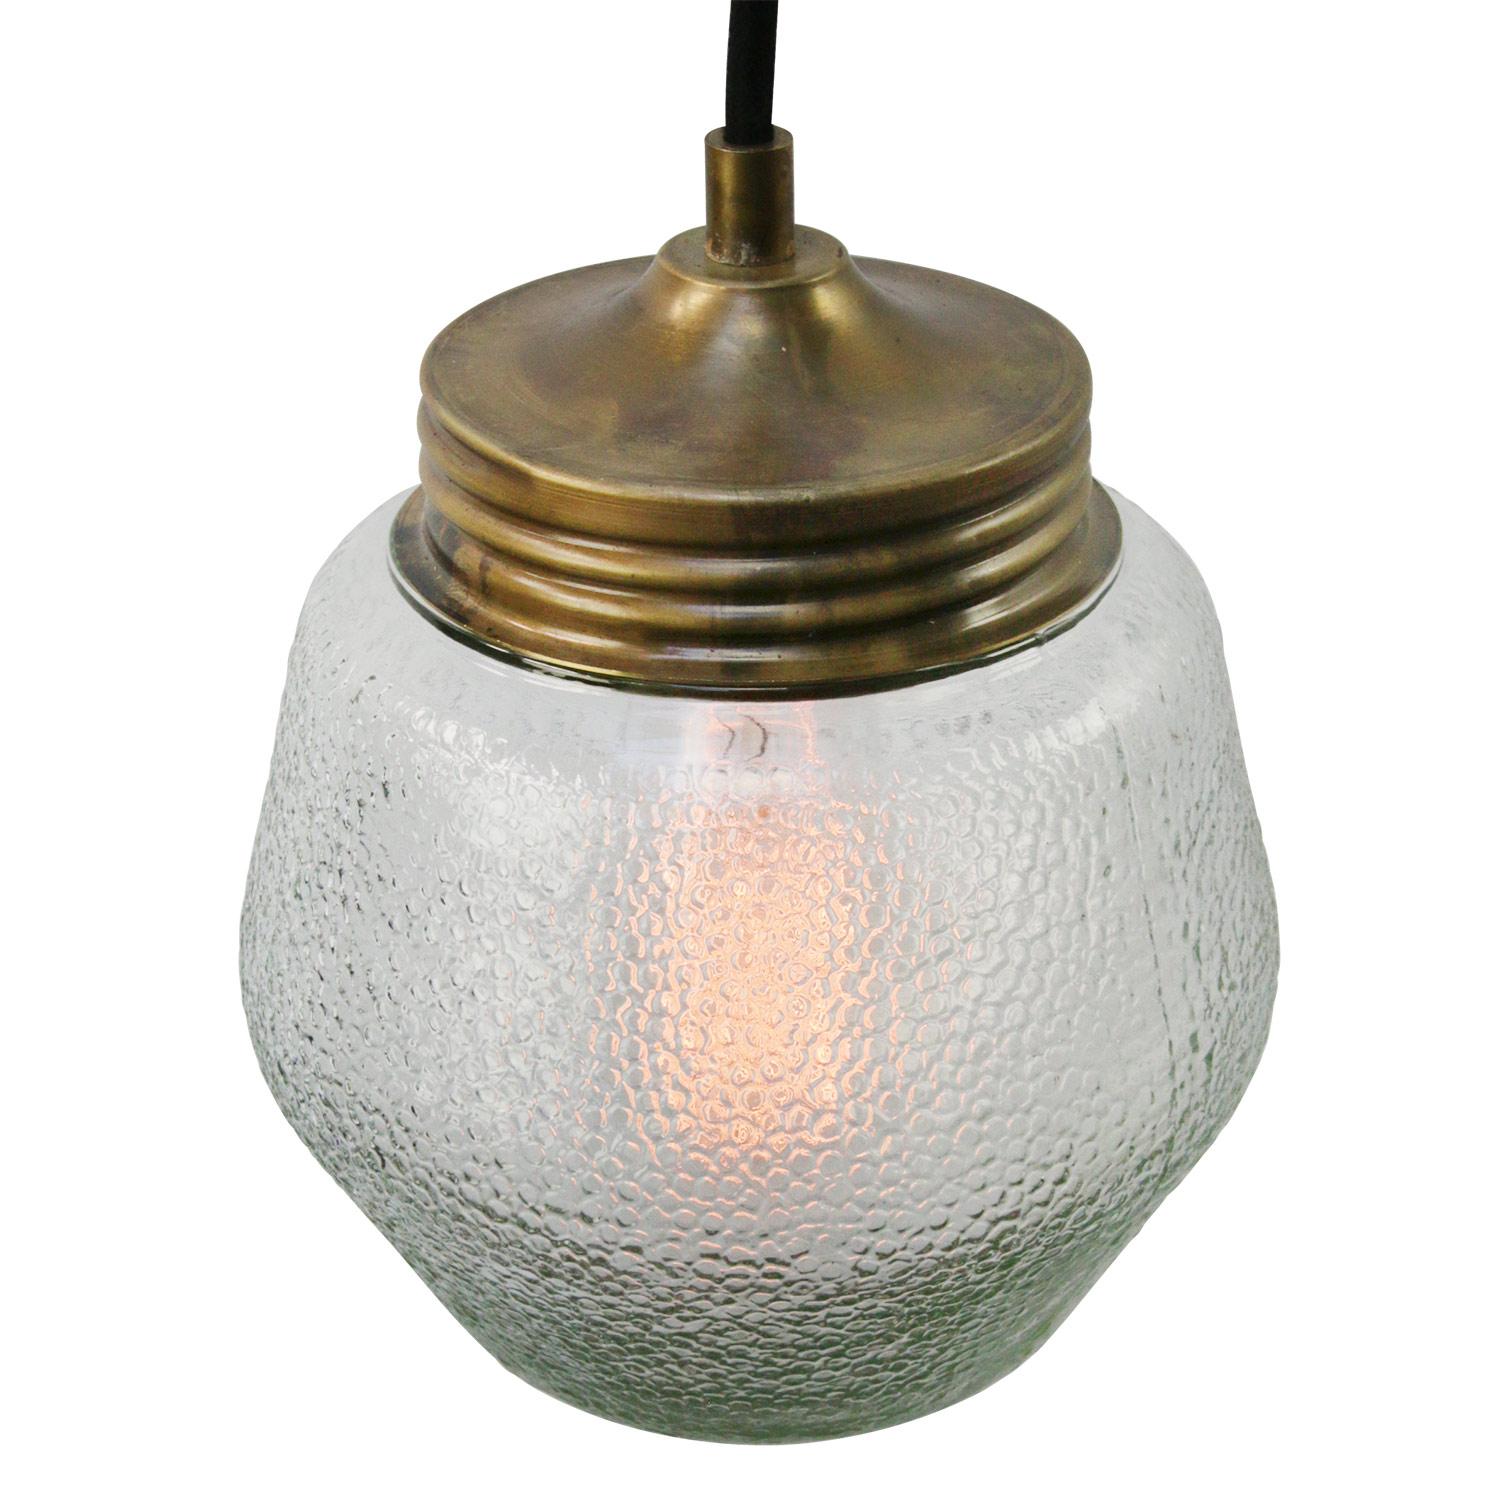 Vintage mid-century brass hanging lamp.
Brass and round oval frosted glass.
3 conductors, including ground wire.

Weight: 0.80 kg / 1.8 lb

Priced per individual item. All lamps have been made suitable by international standards for